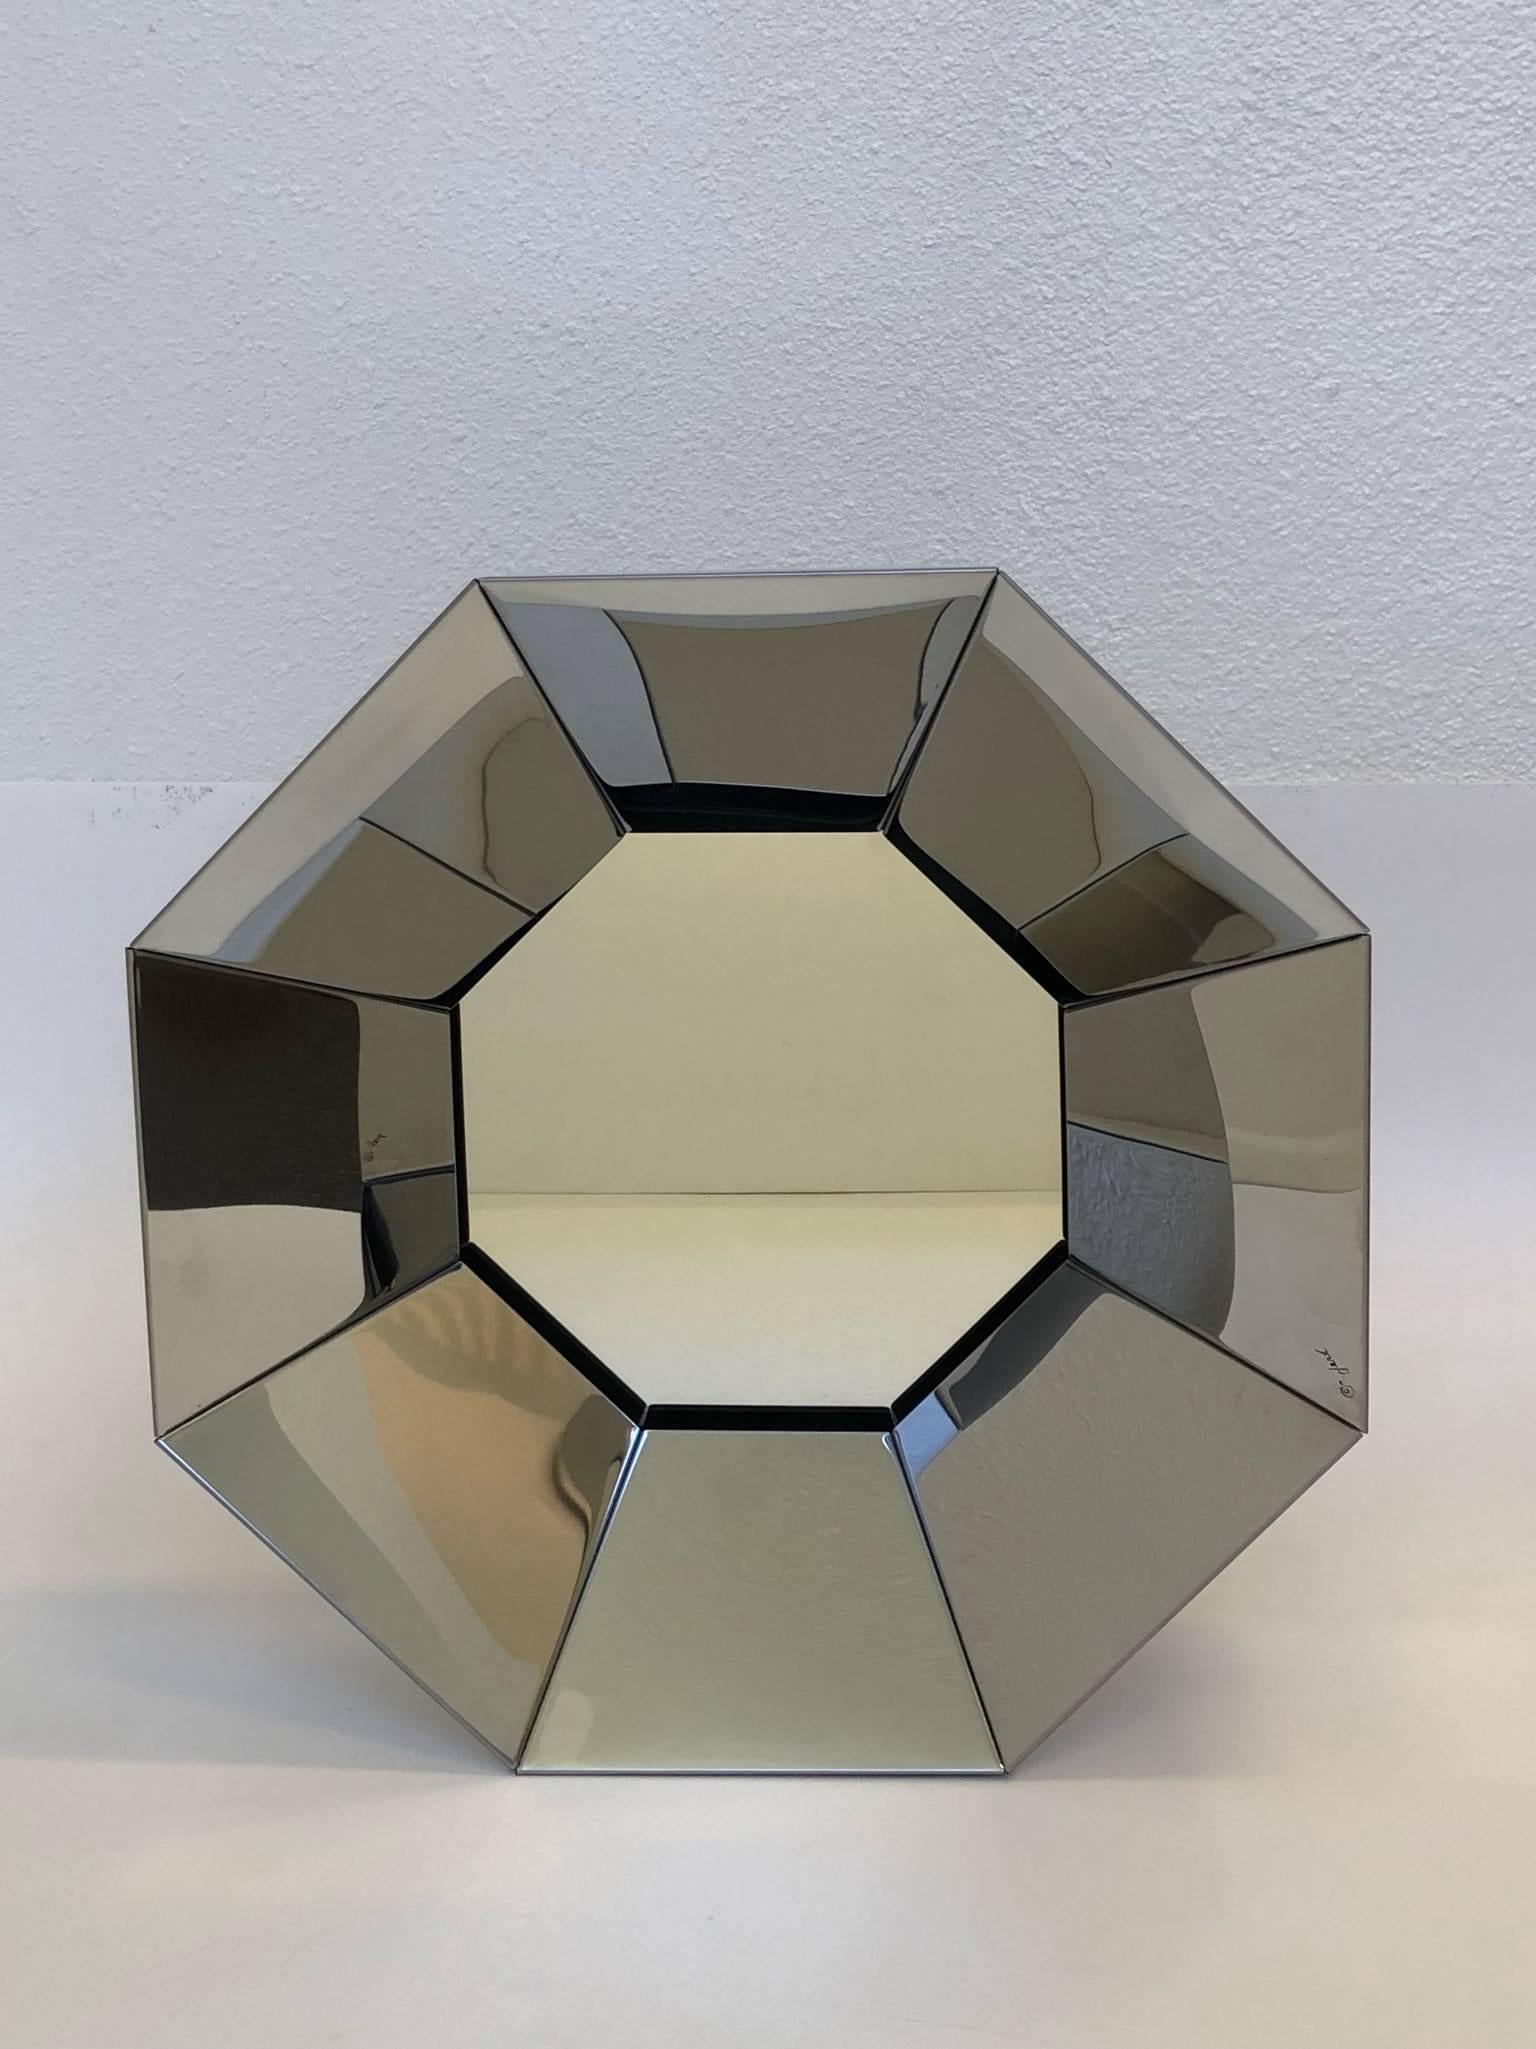 A beautiful 1970s hexagonal shape chrome mirror by Curtis Jere. The mirror is signed.
Dimension: 16” high, 16” wide and 5” deep.
   